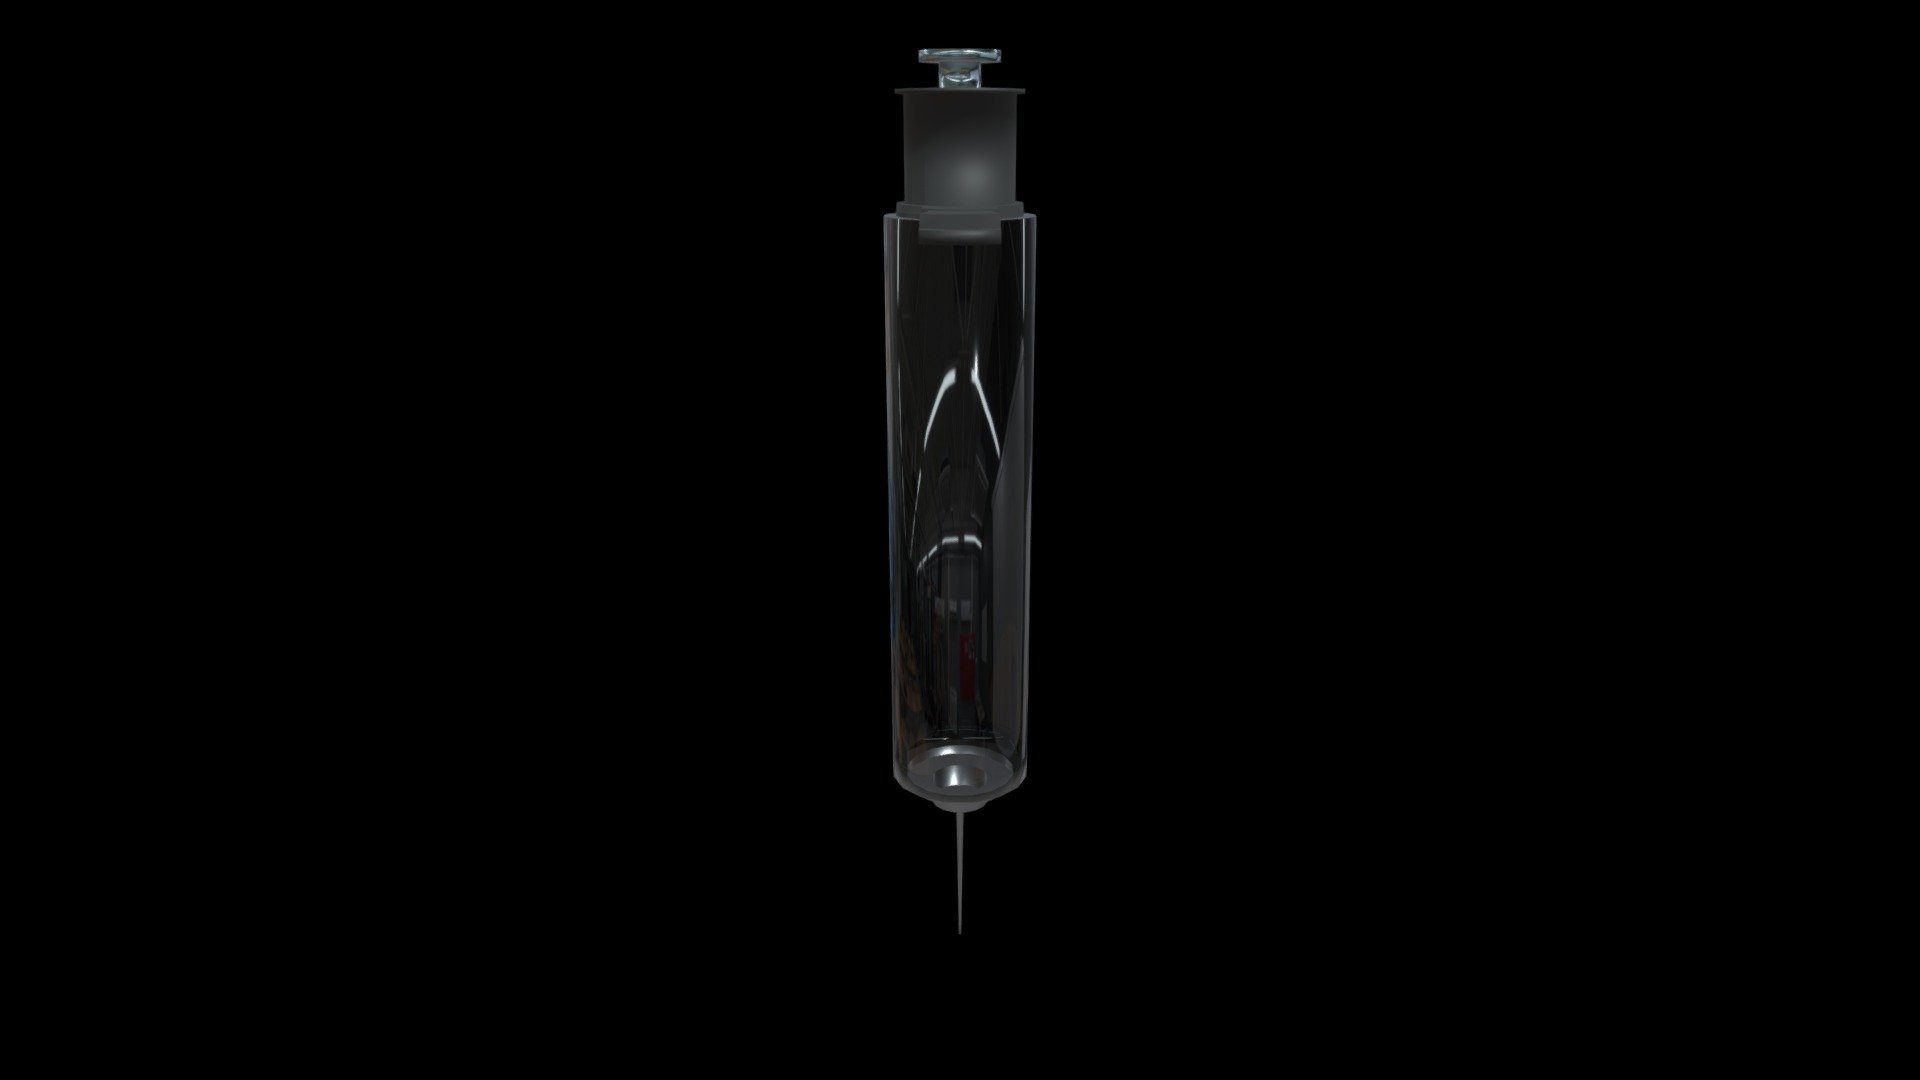 A simple, low-poly Medical Syringe intended to be used as a medical prop in video games 3d model